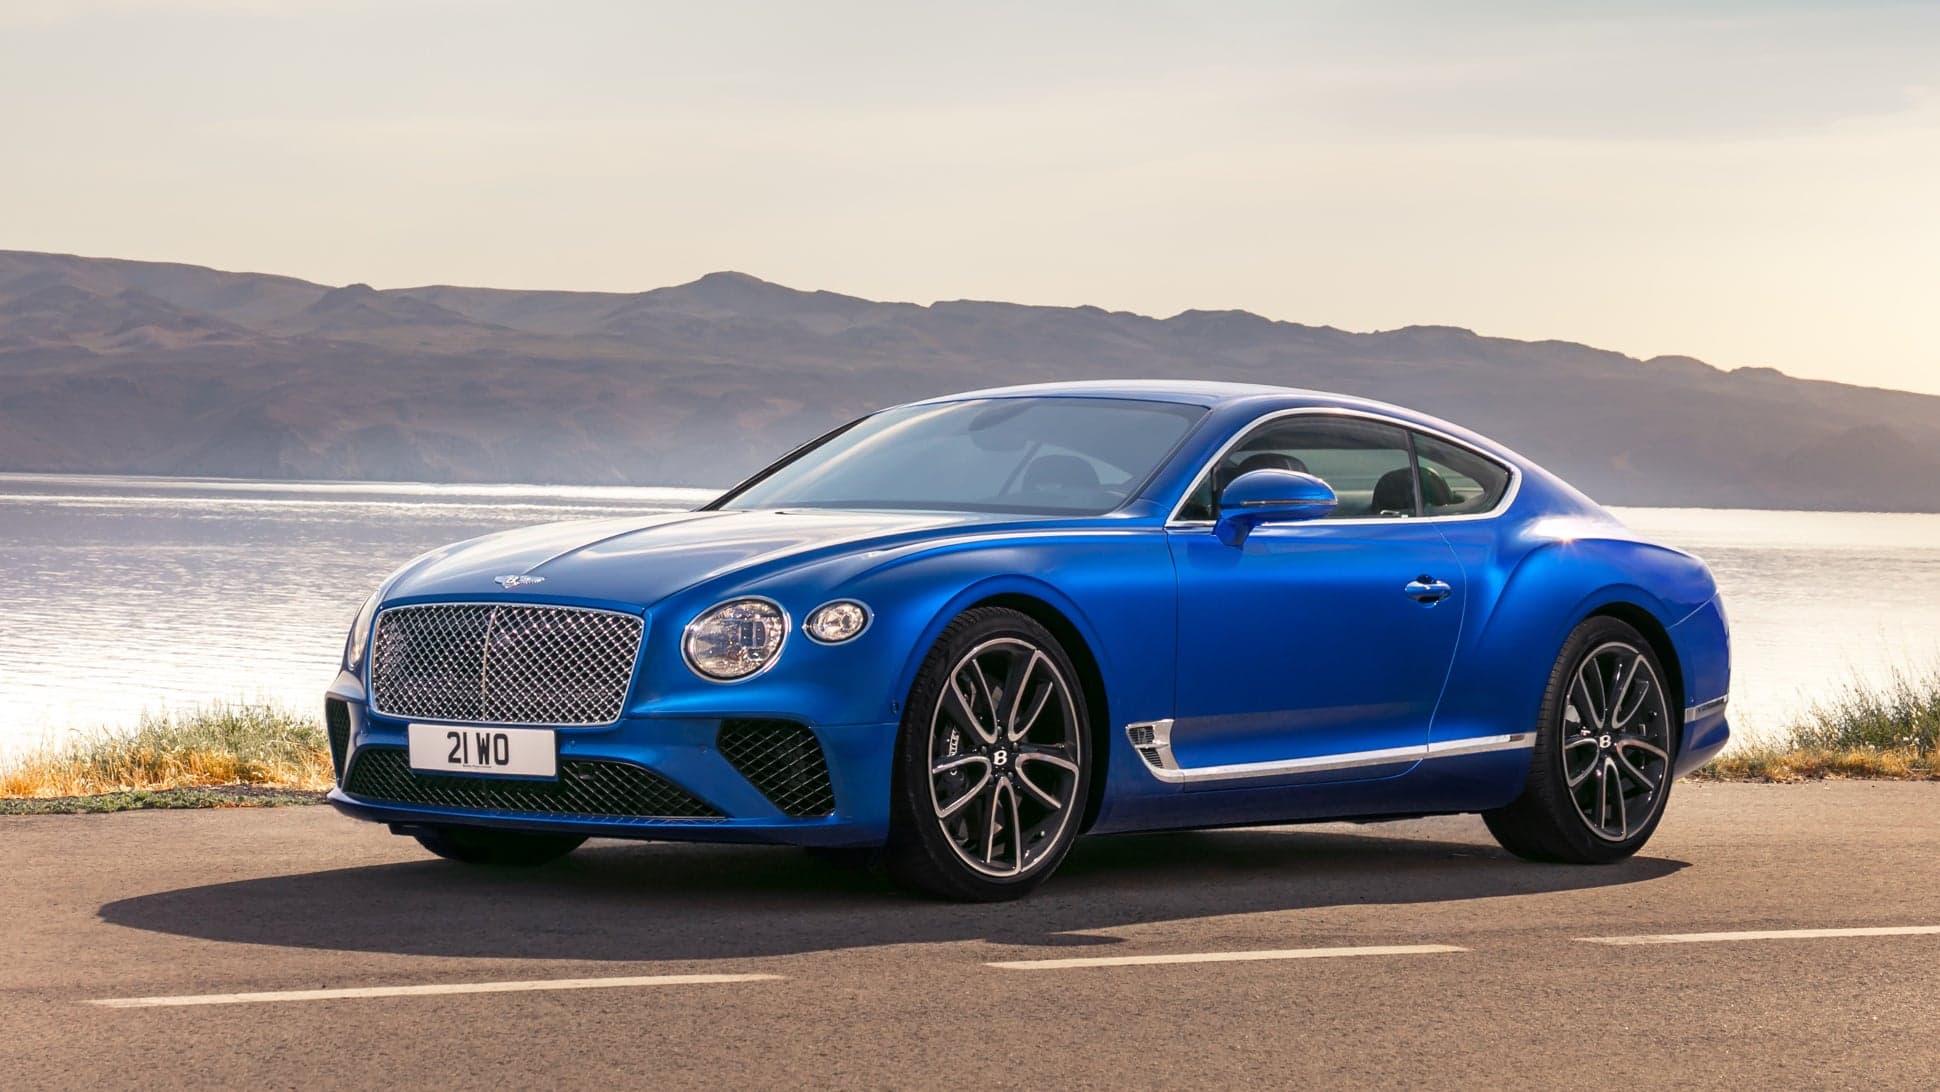 Bentley, Lamborghini and Ducati Will Stay In the Volkswagen Group